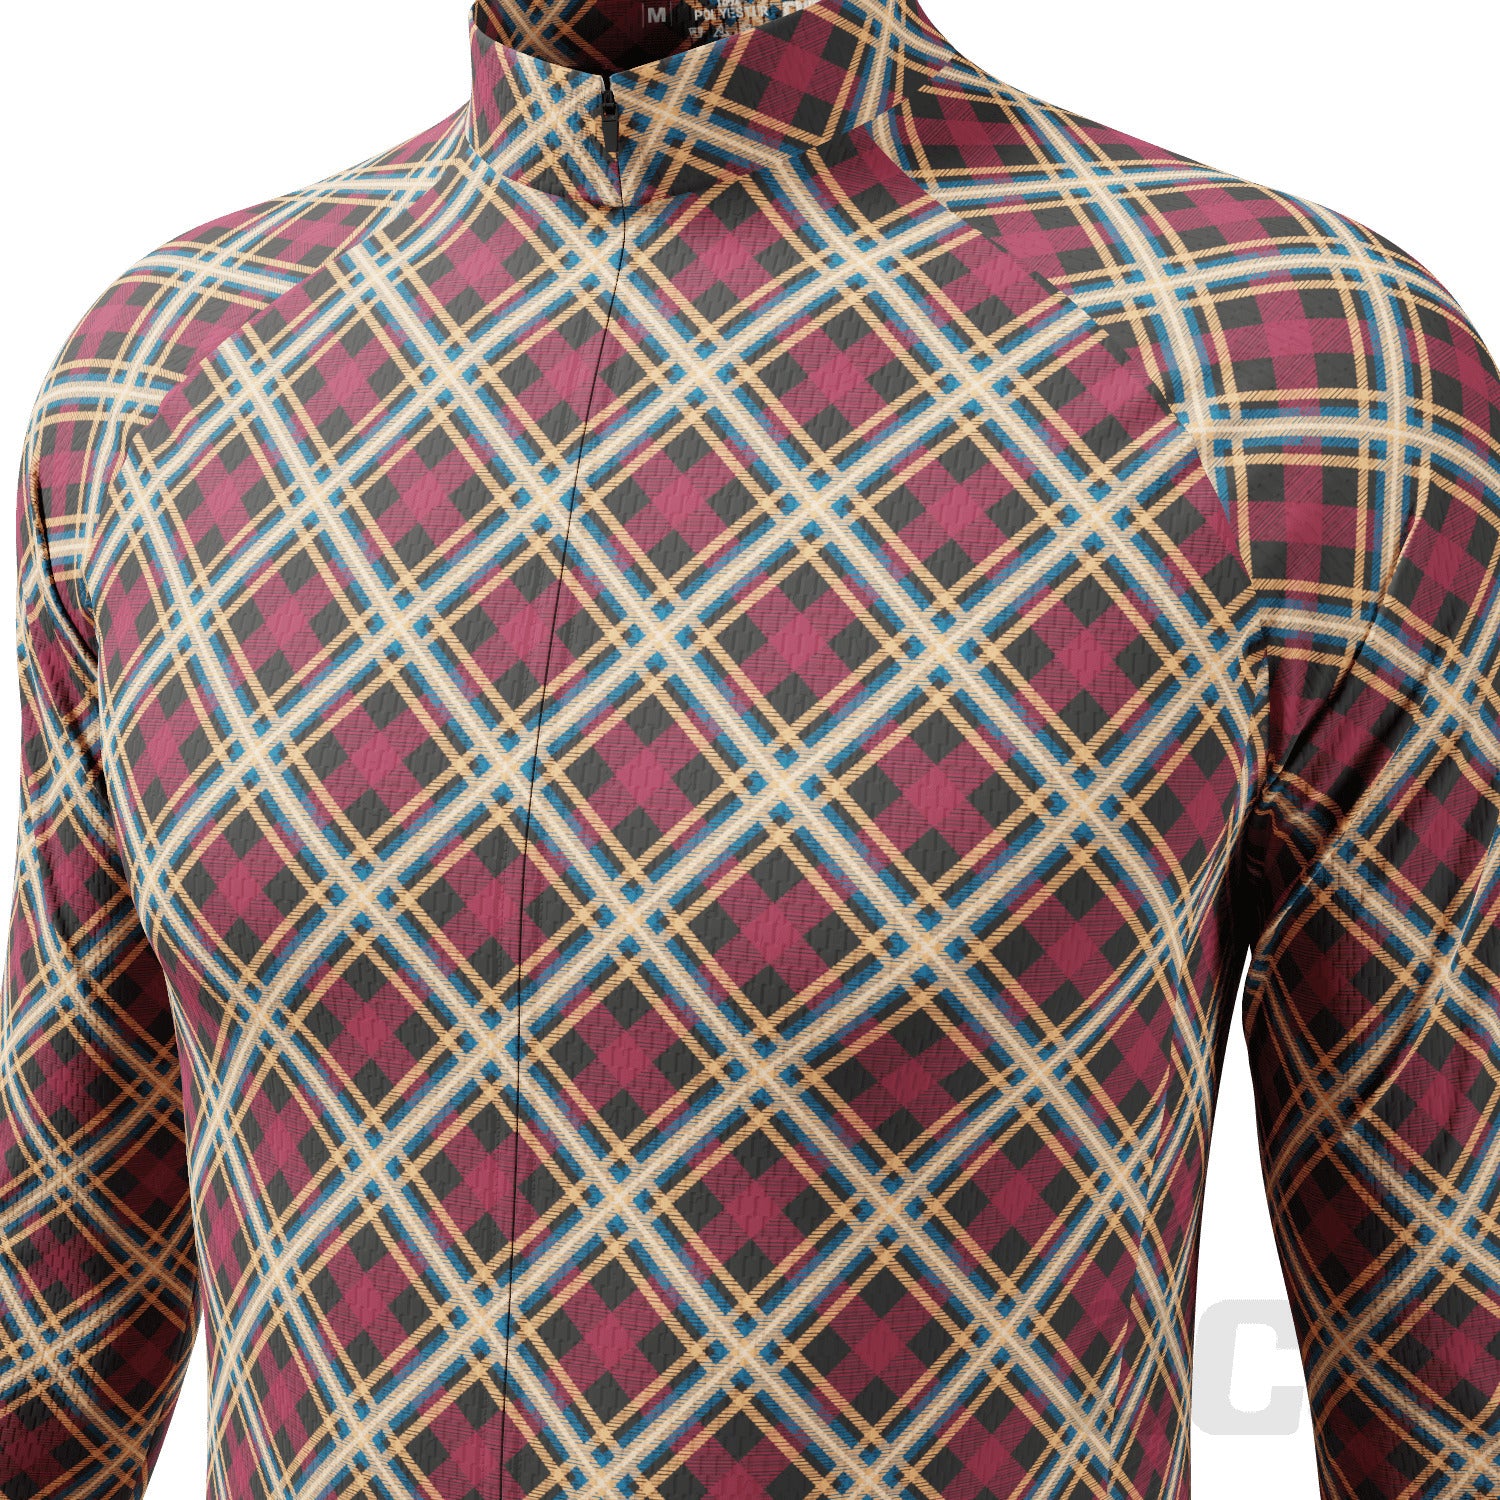 Men's Red Plaid Checkered Long Sleeve Cycling Jersey